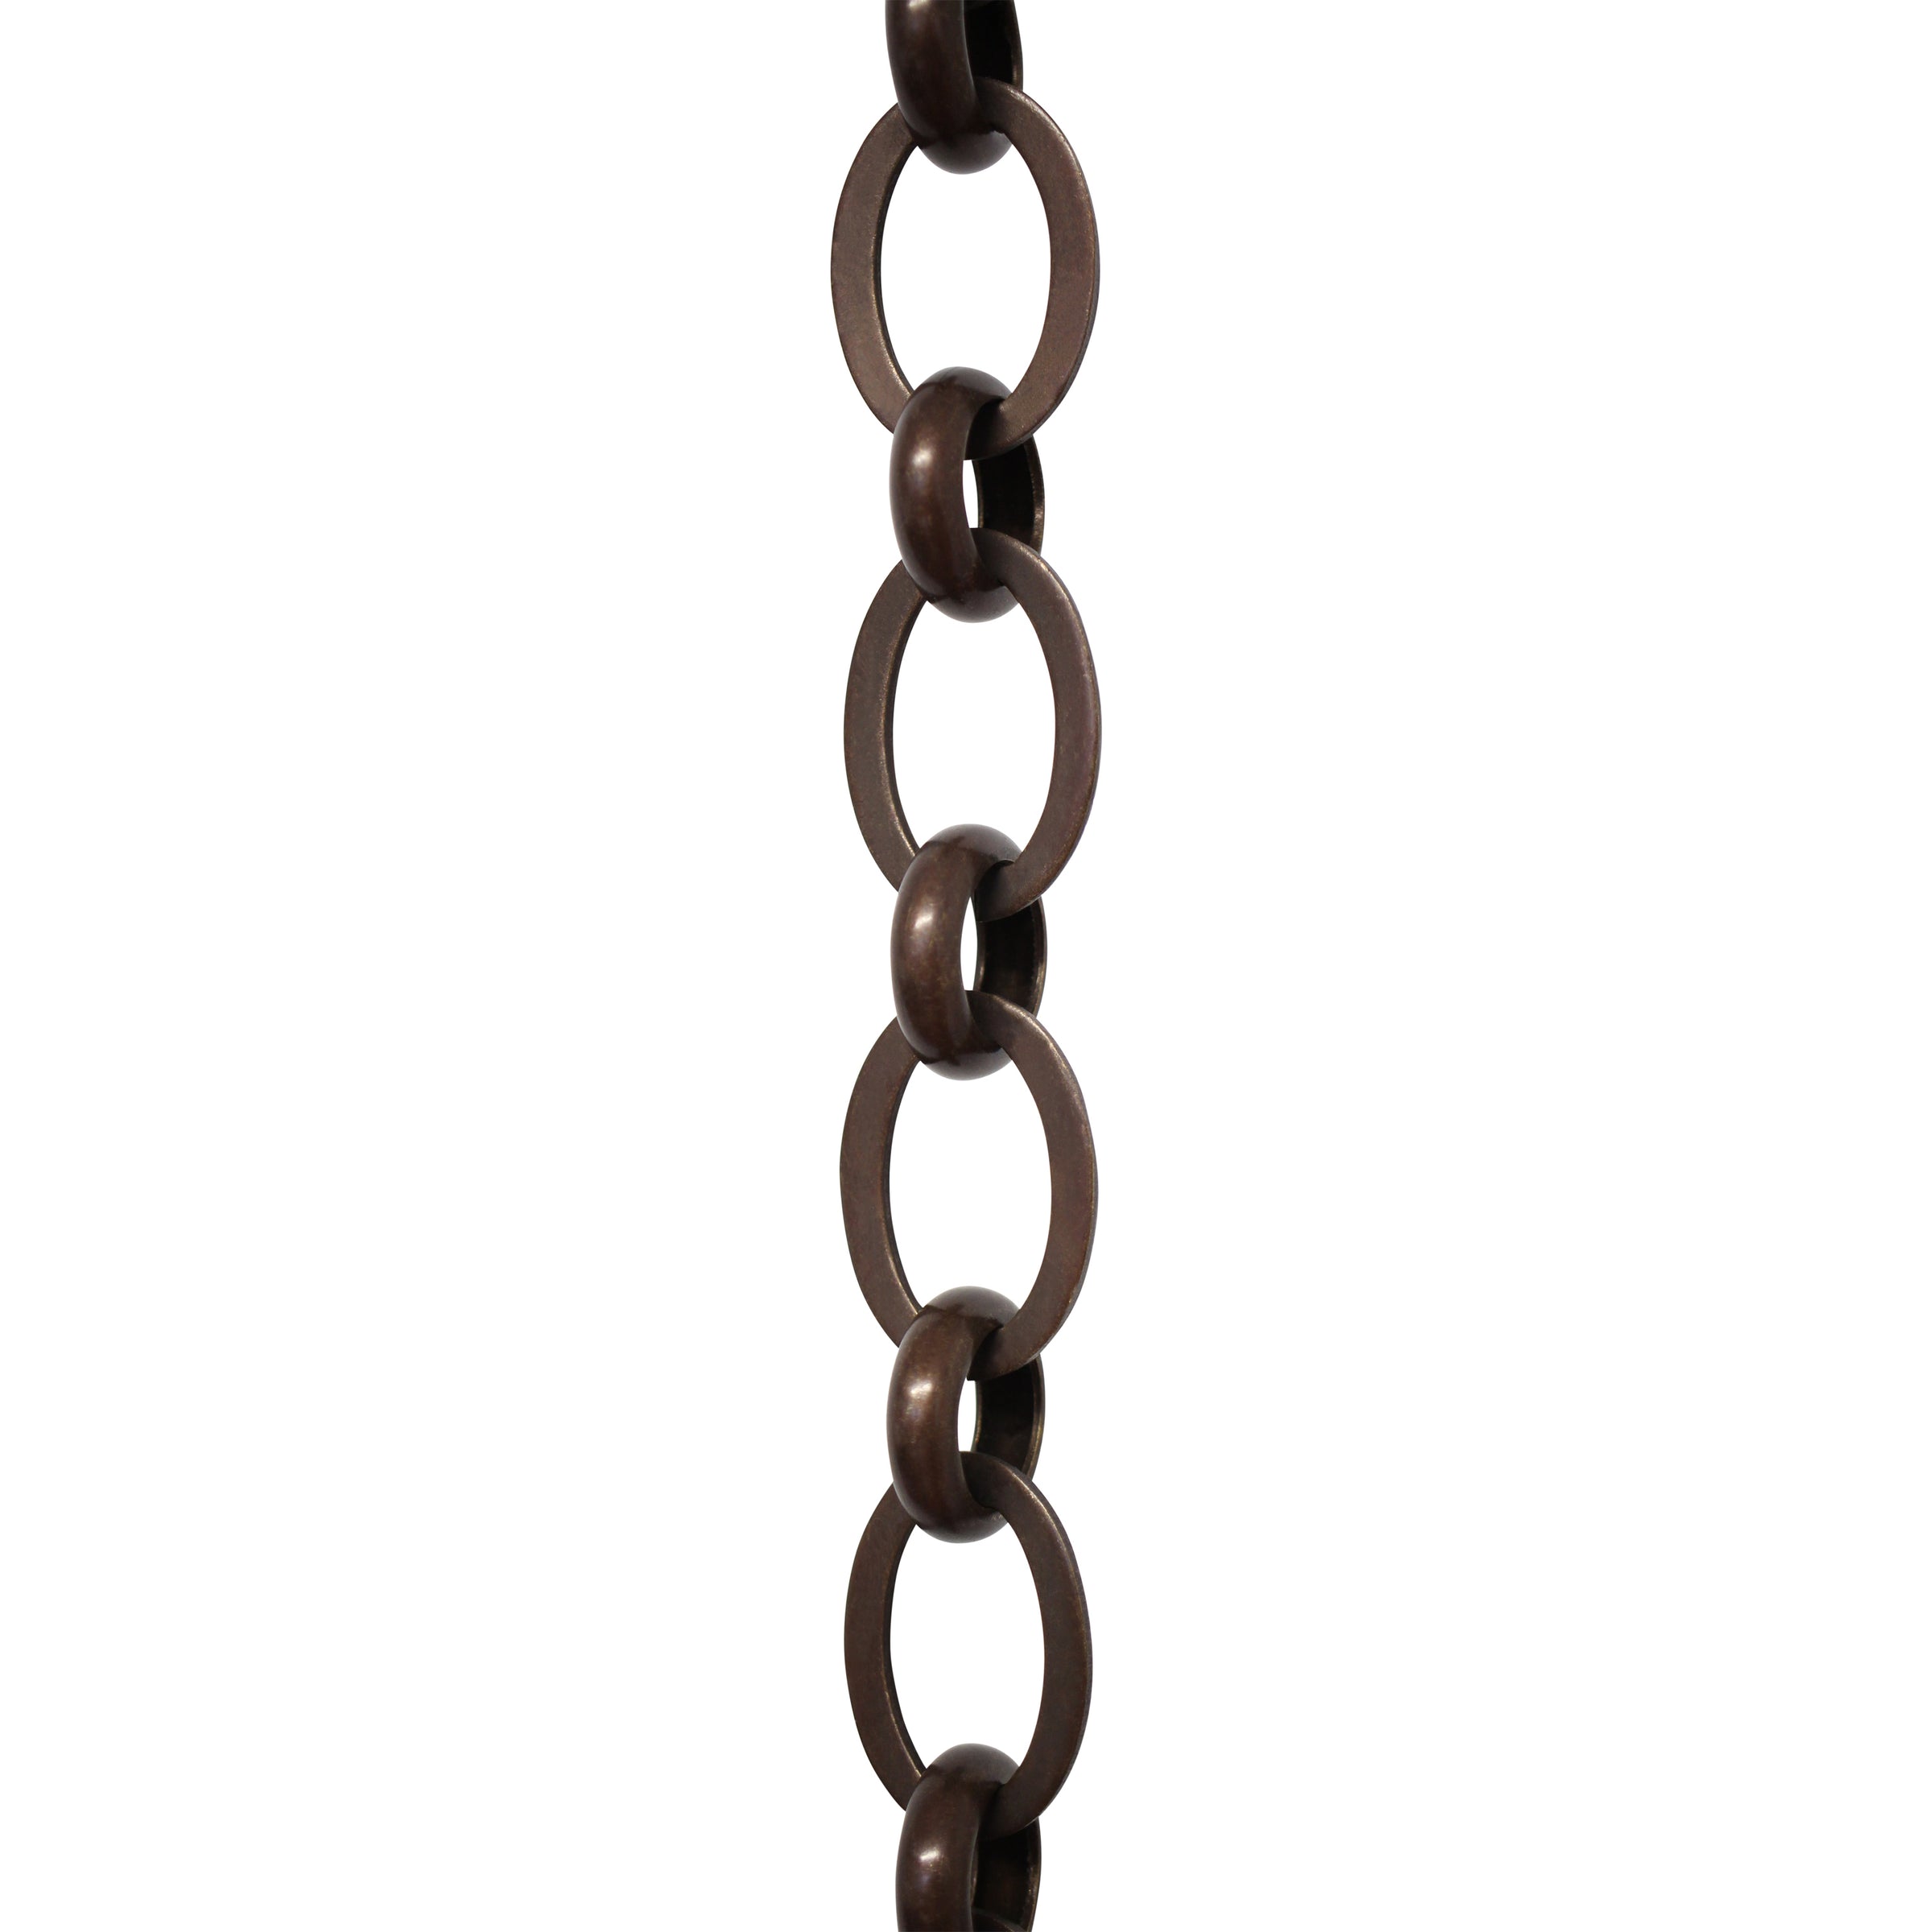 B8830 Natural Brass, Oval Chain, Solid Brass-LL (36 length) 